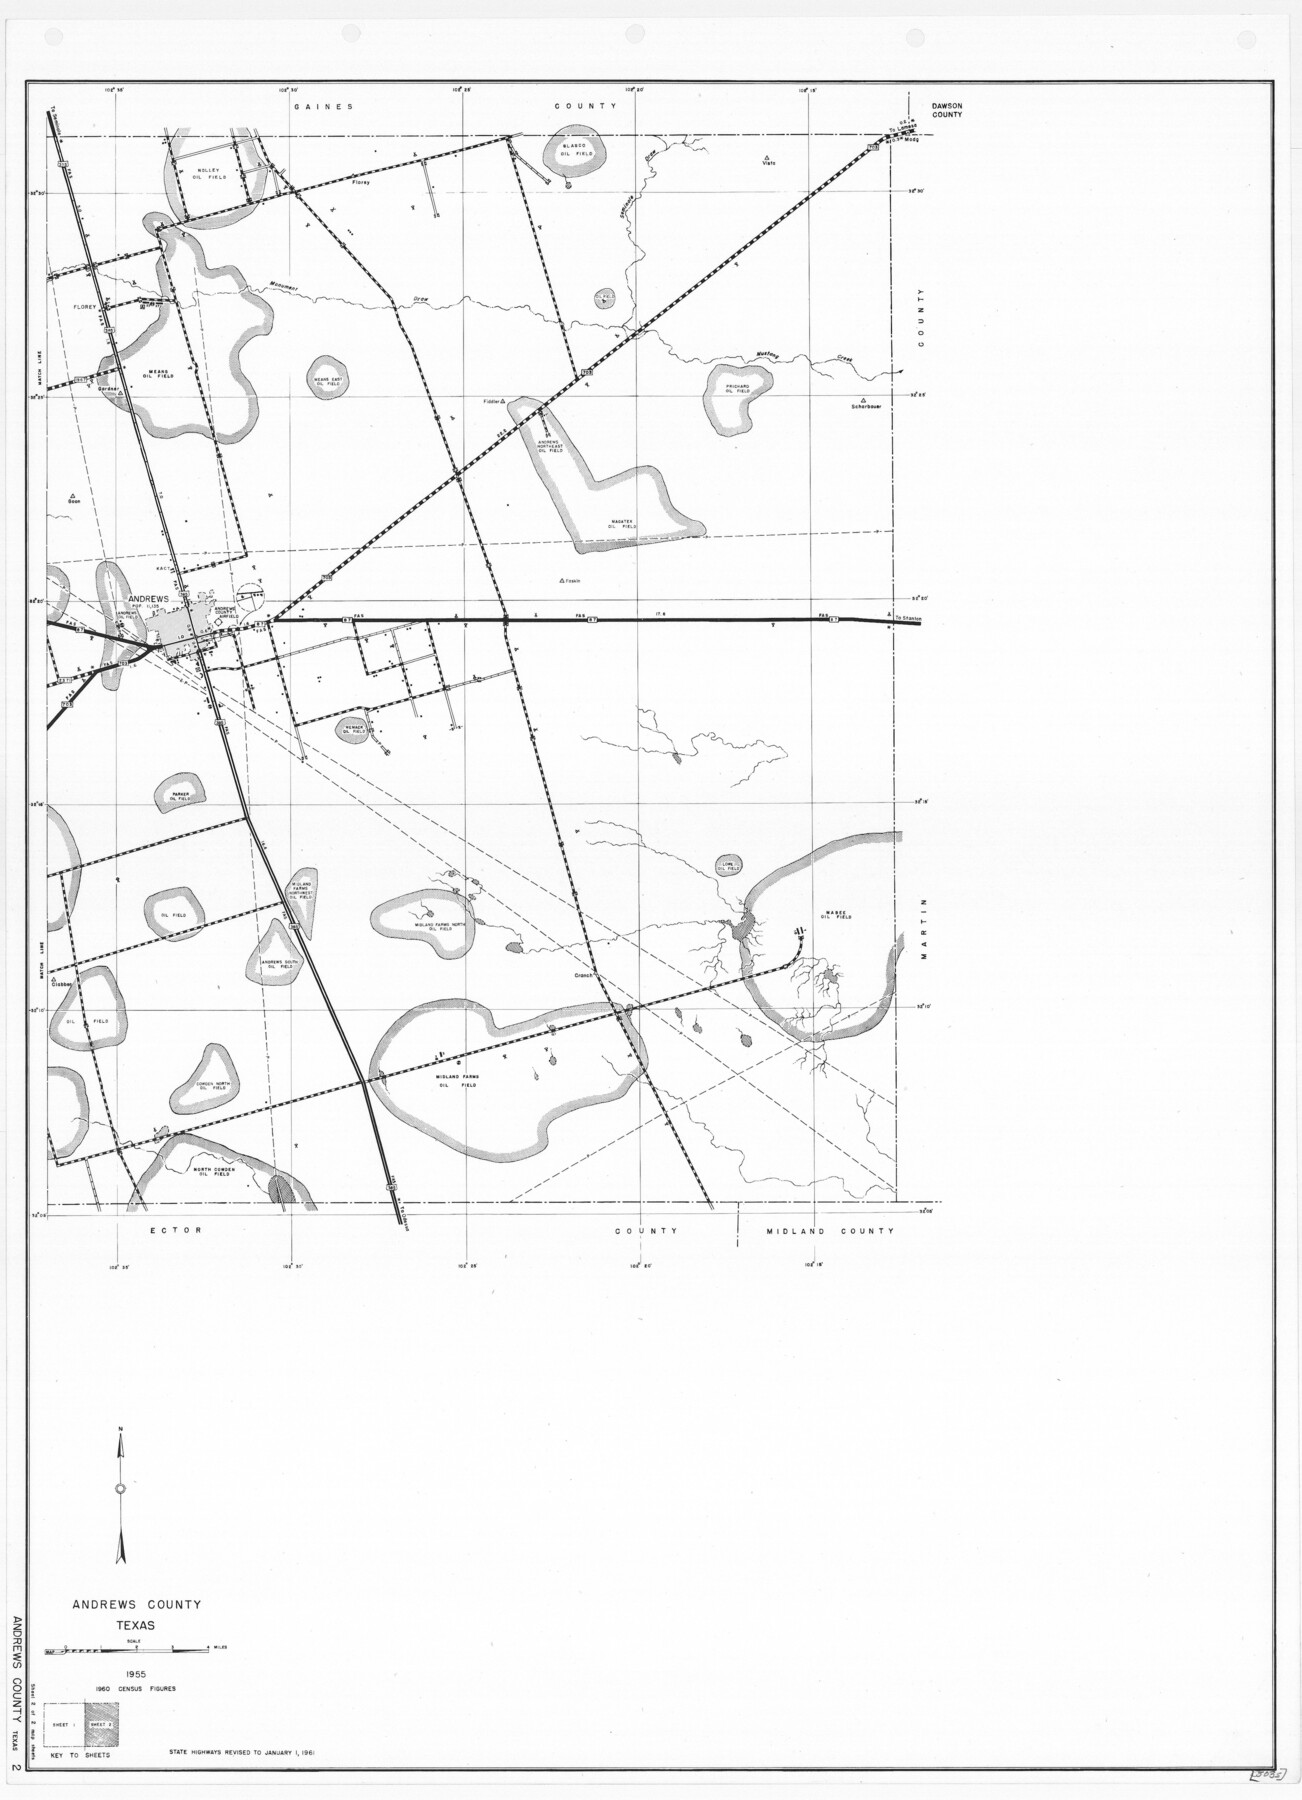 79348, General Highway Map, Andrews County, Texas, Texas State Library and Archives